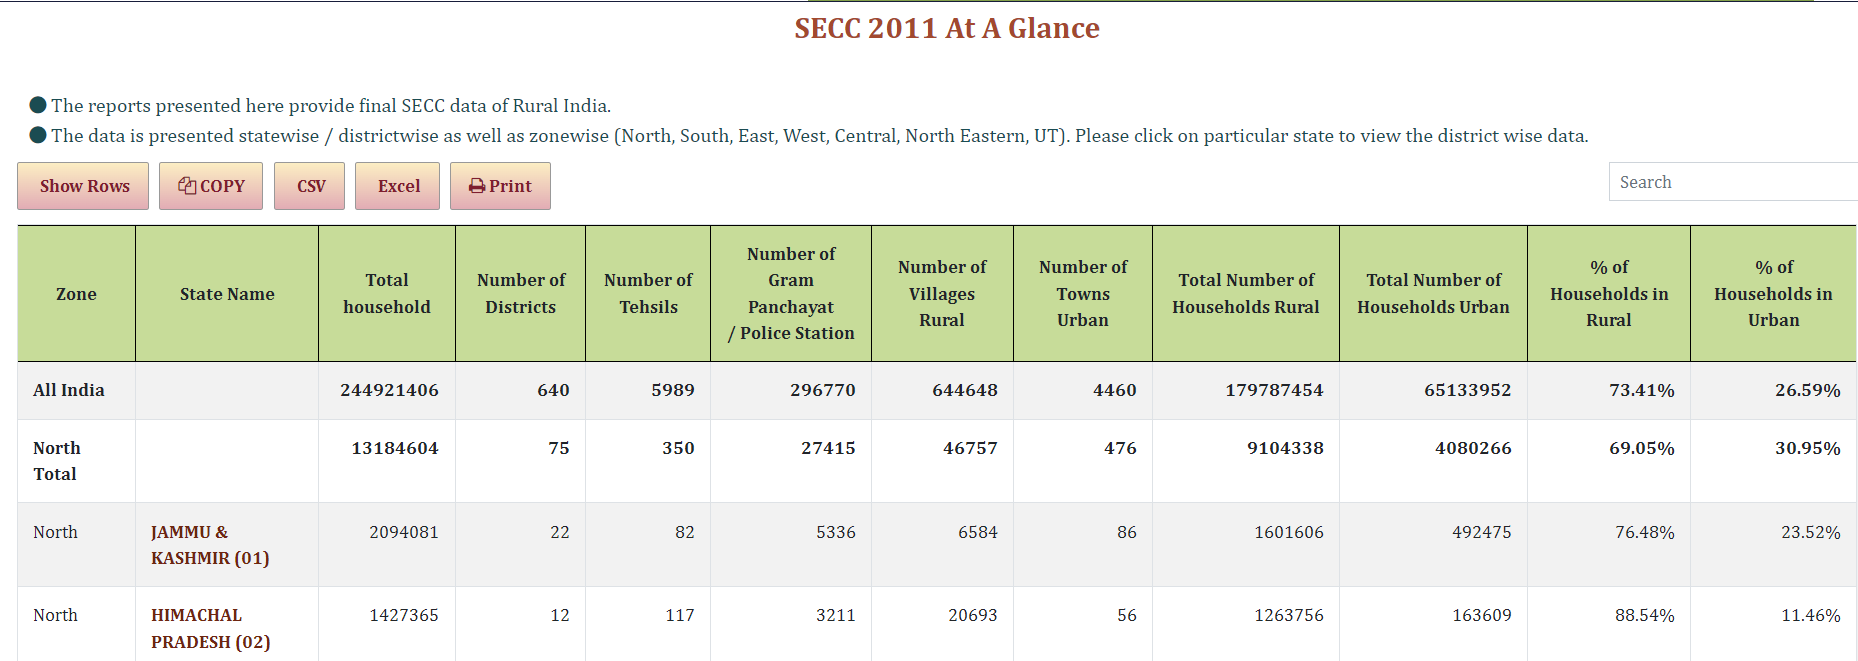 SECC 2011 Final Data Summary Statewise